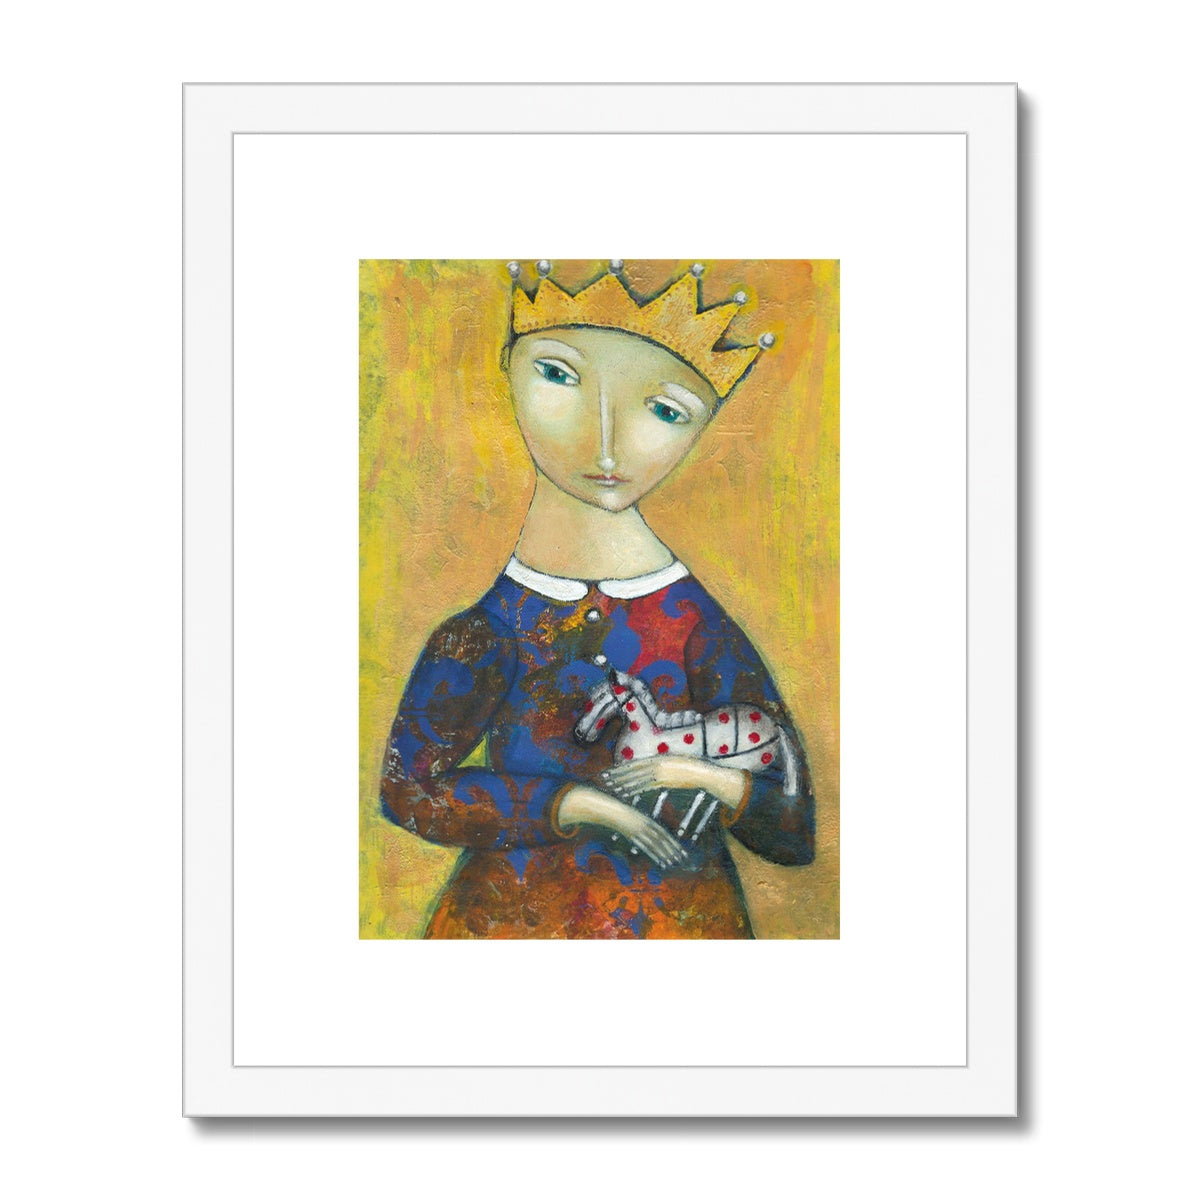 The Little Prince, Framed & Mounted Print